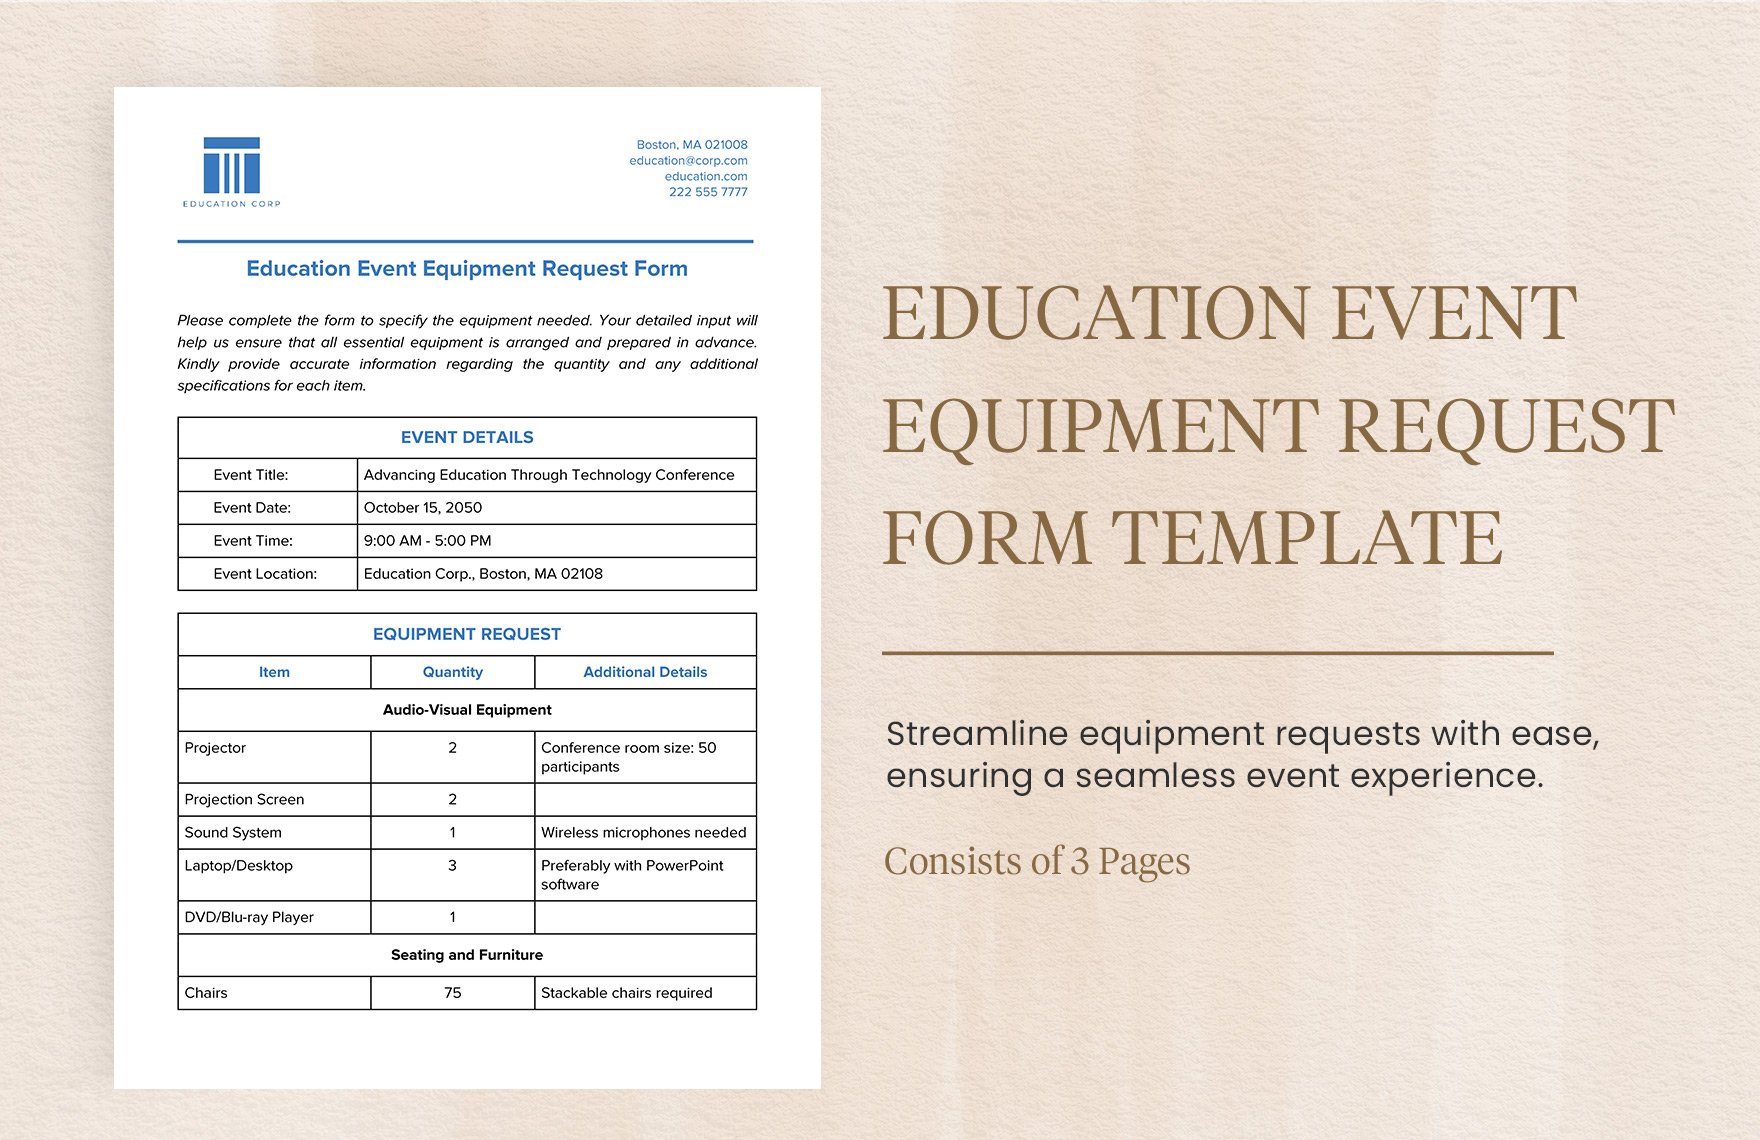 Education Event Equipment Request Form Template